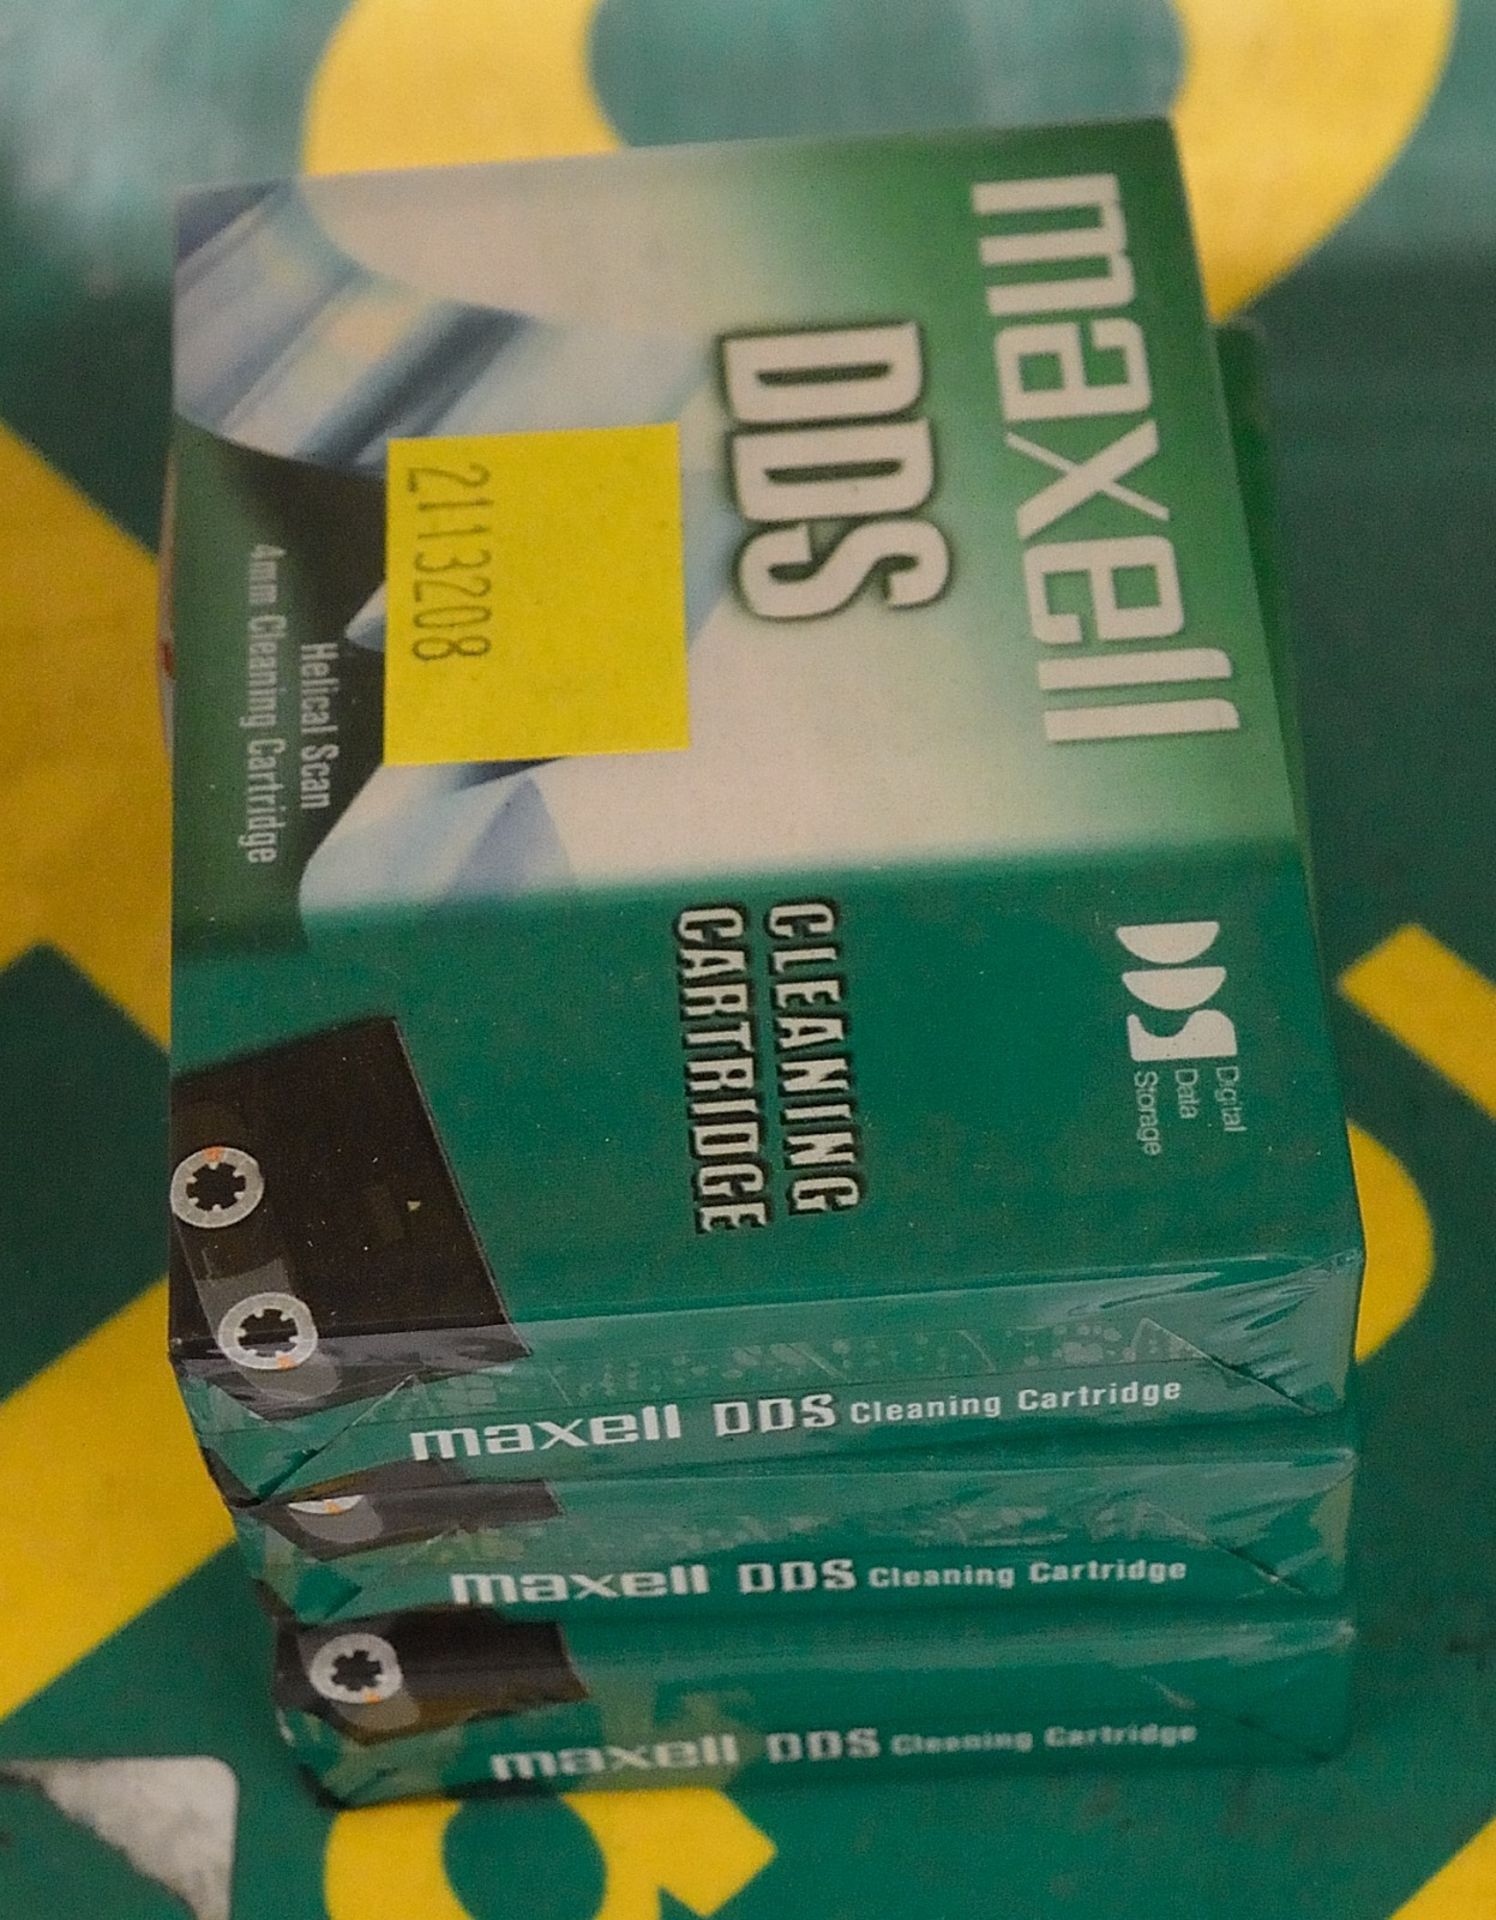 3x Maxell DDS Cleaning Cartridges 4mm.